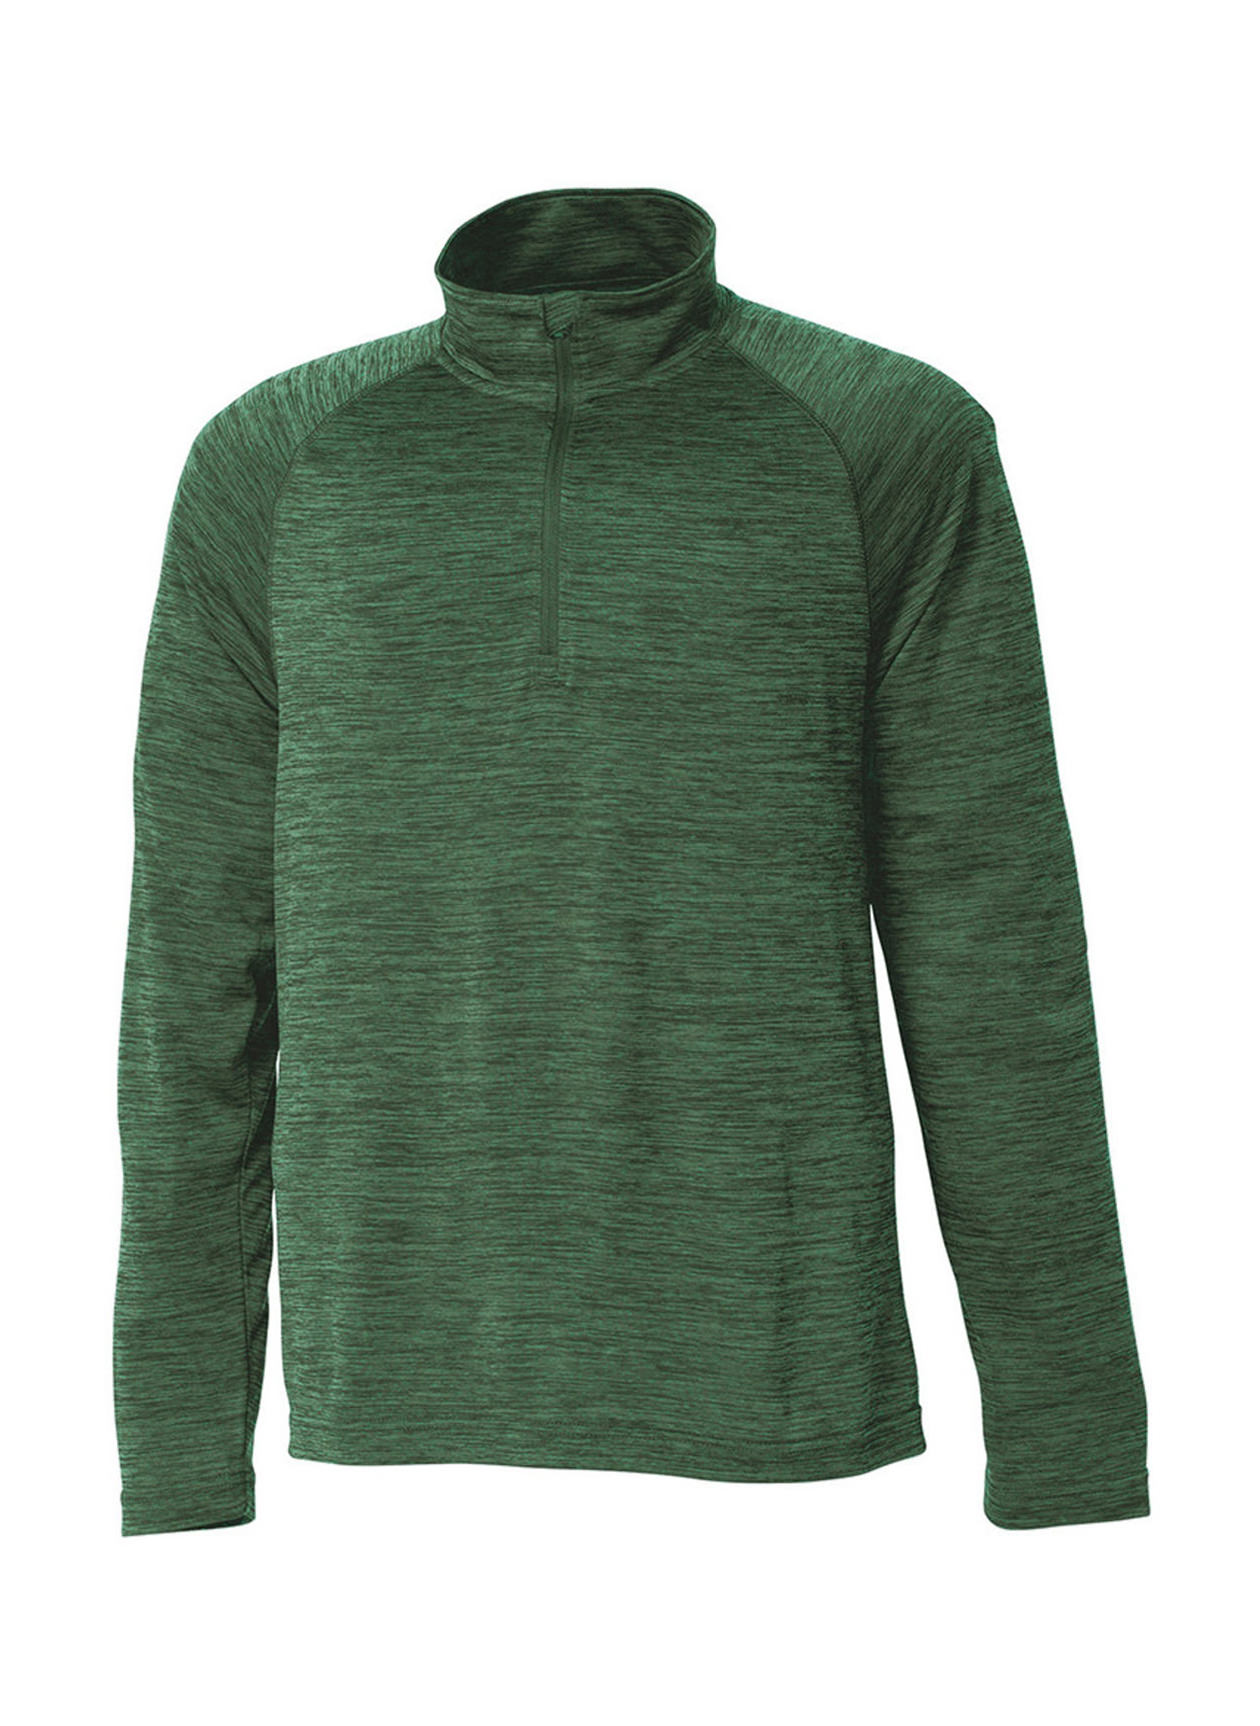 Charles River Men's Forest Space Dyed Quarter-Zip